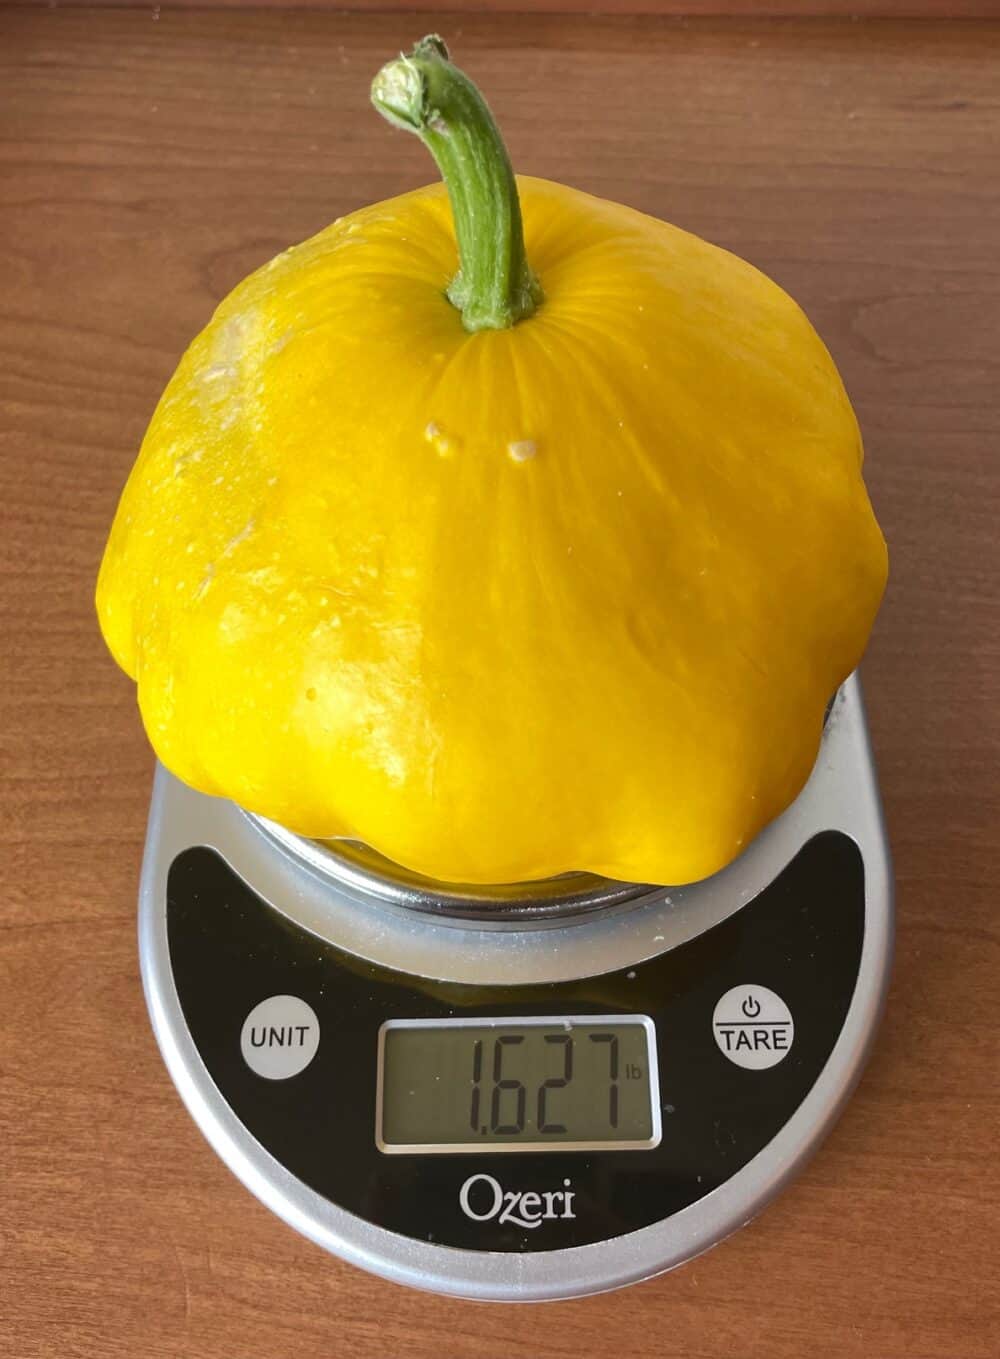 A patty pan squash on a scale reading over one and half pounds.